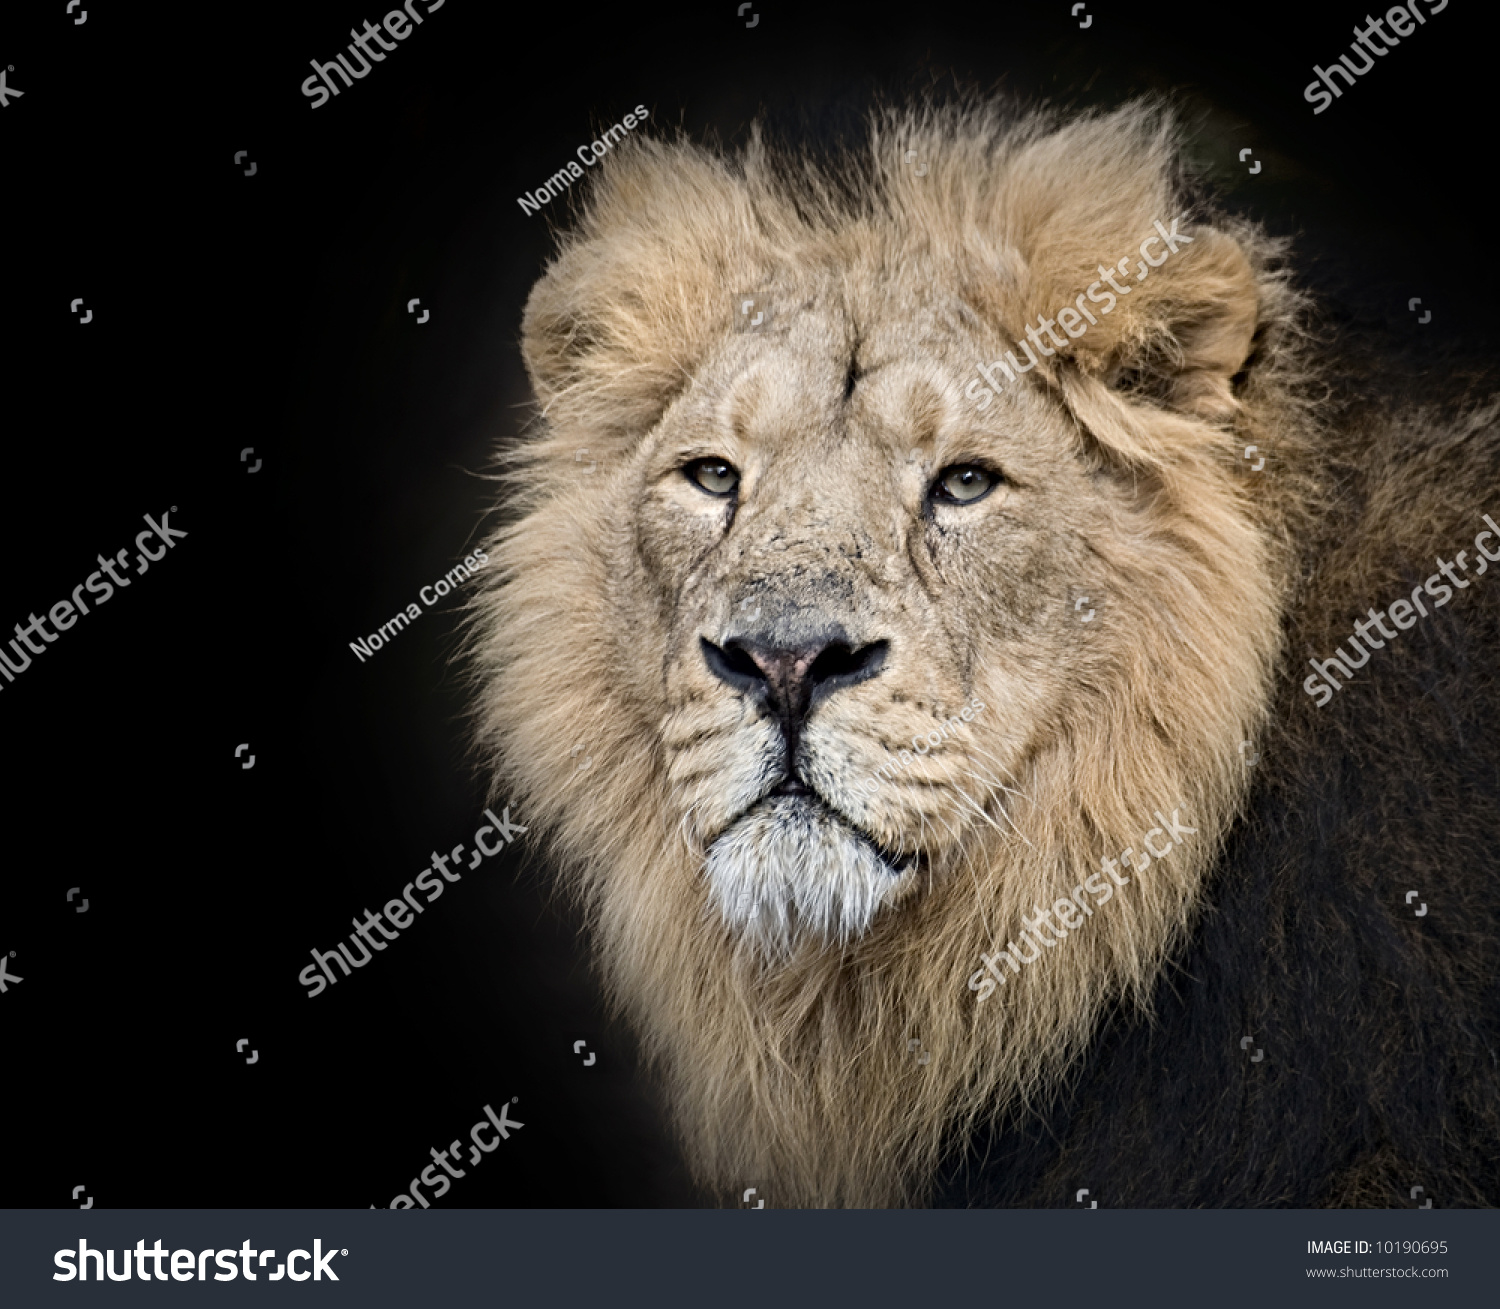 King Jungle His Chilling Stare On Stock Photo Edit Now